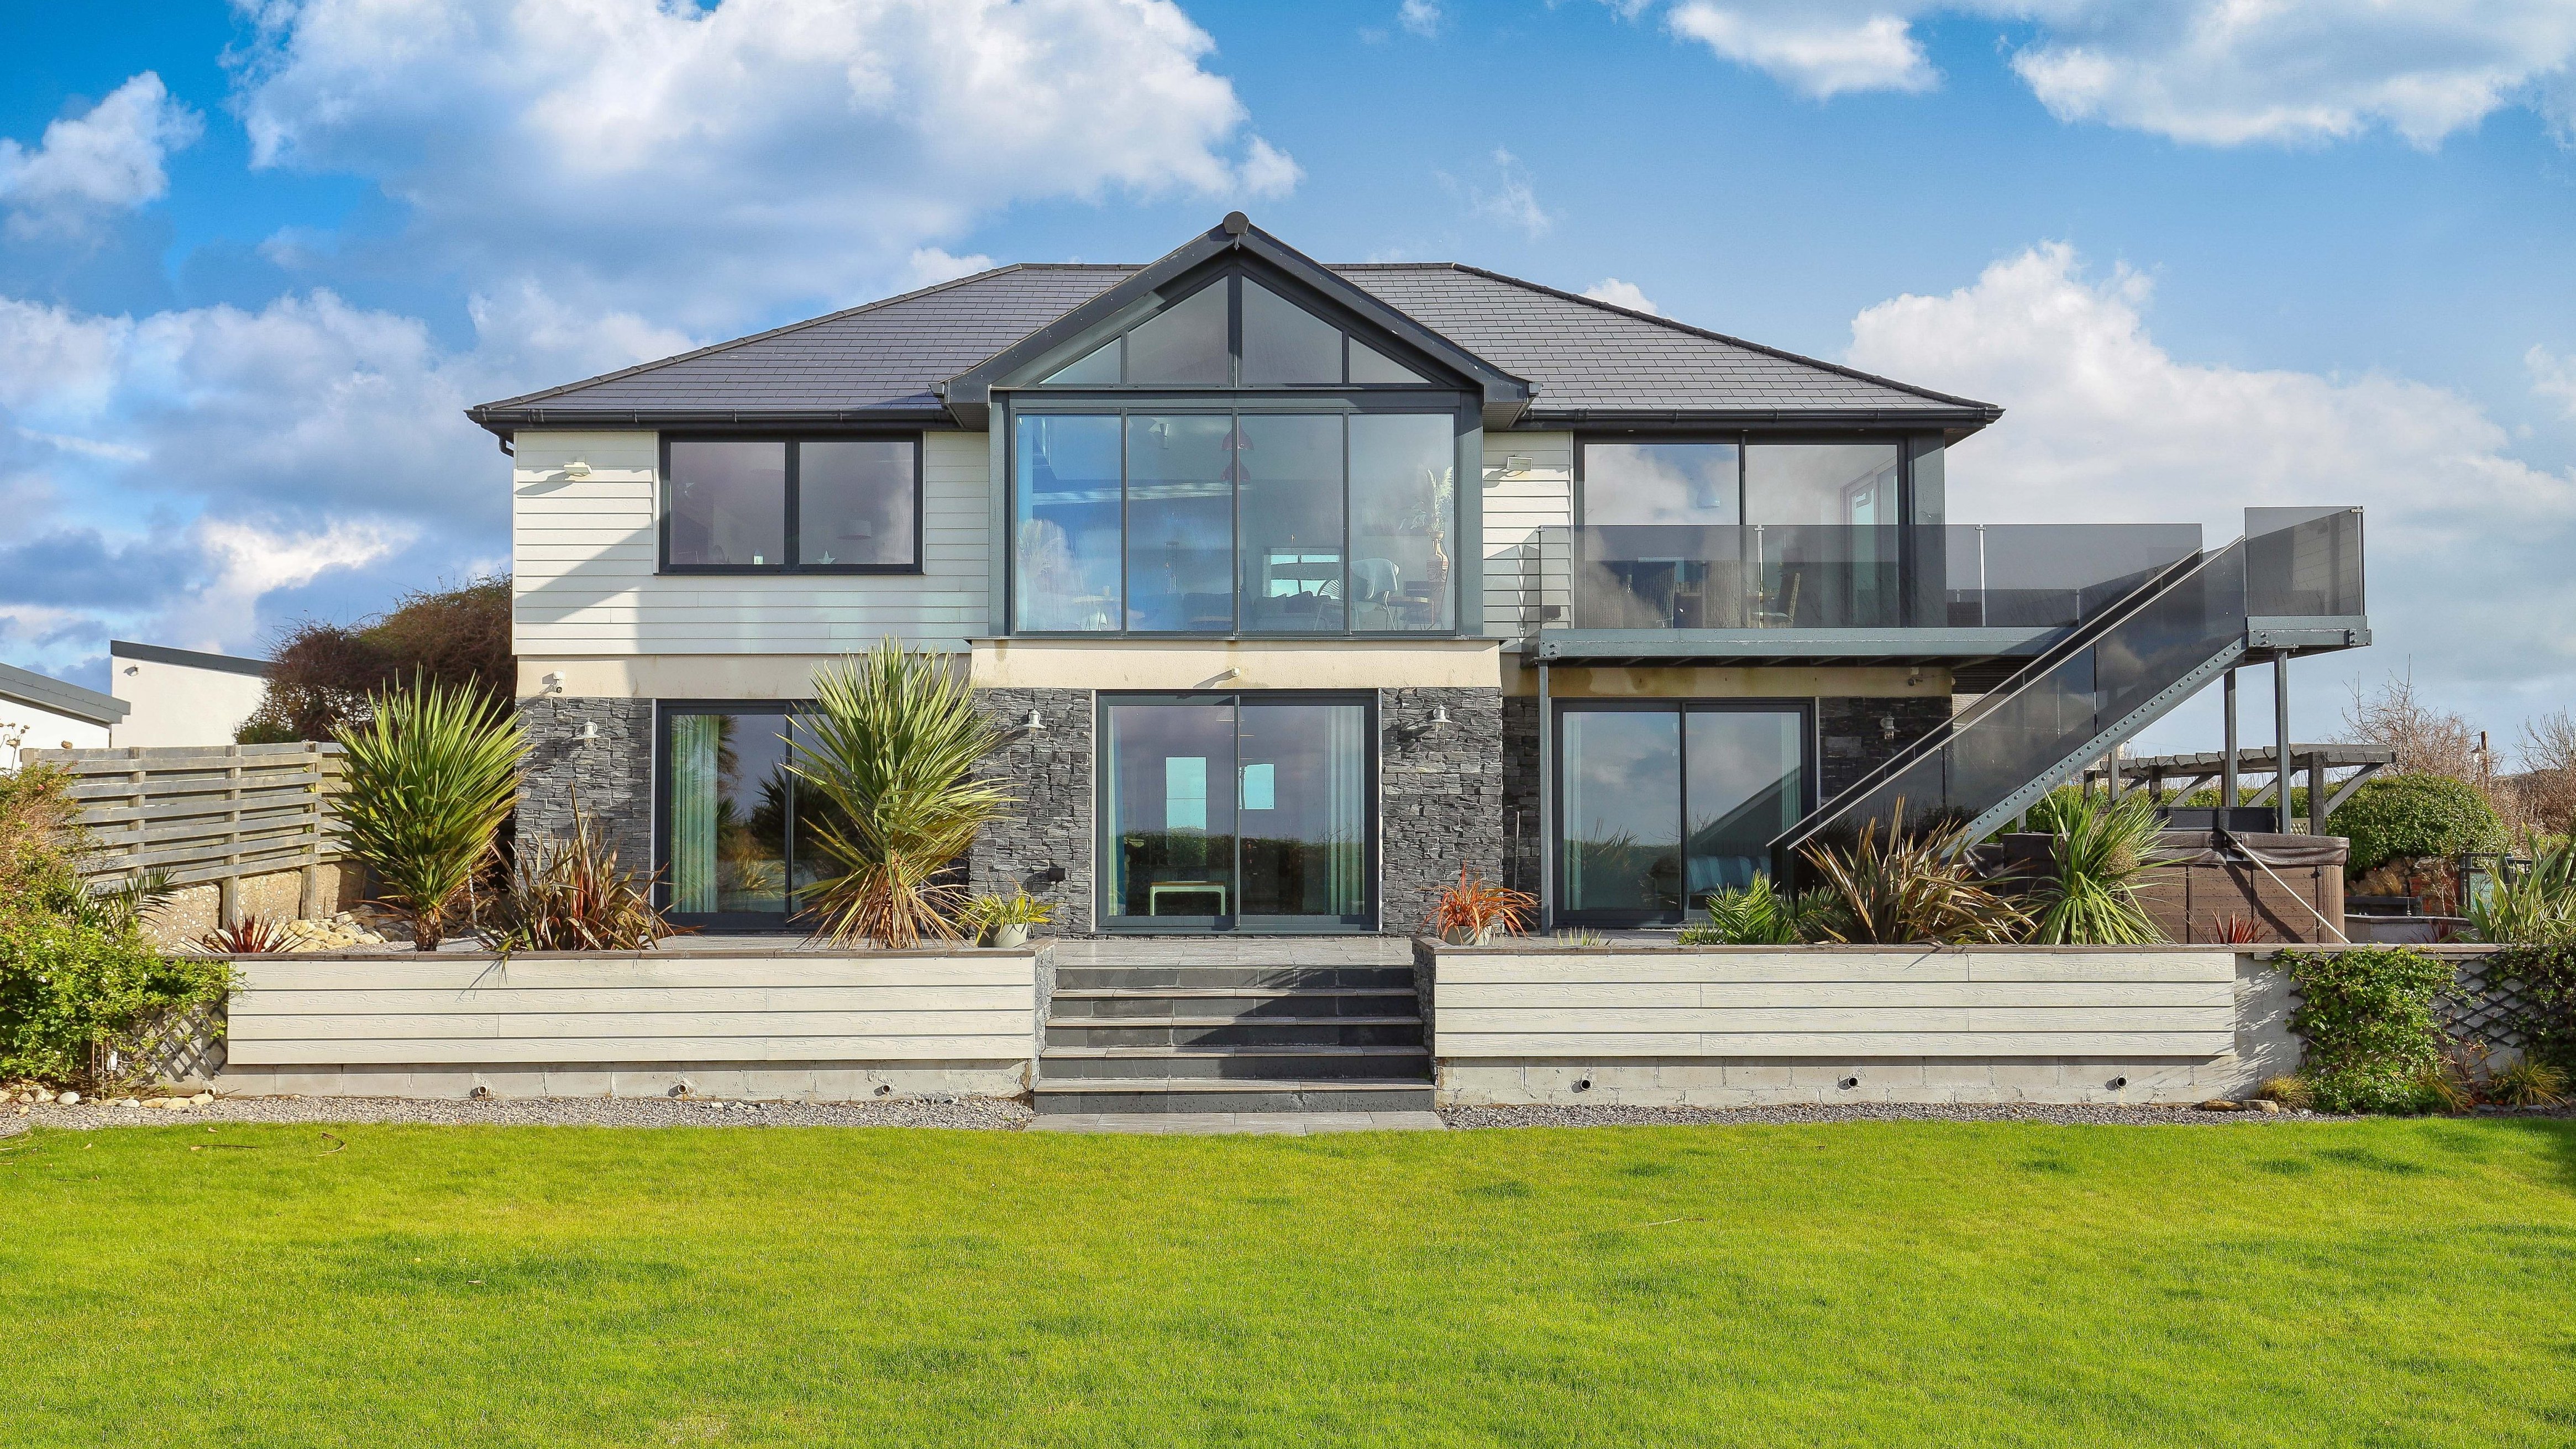 A modern six-bedroom home with views of the Bristol Channel